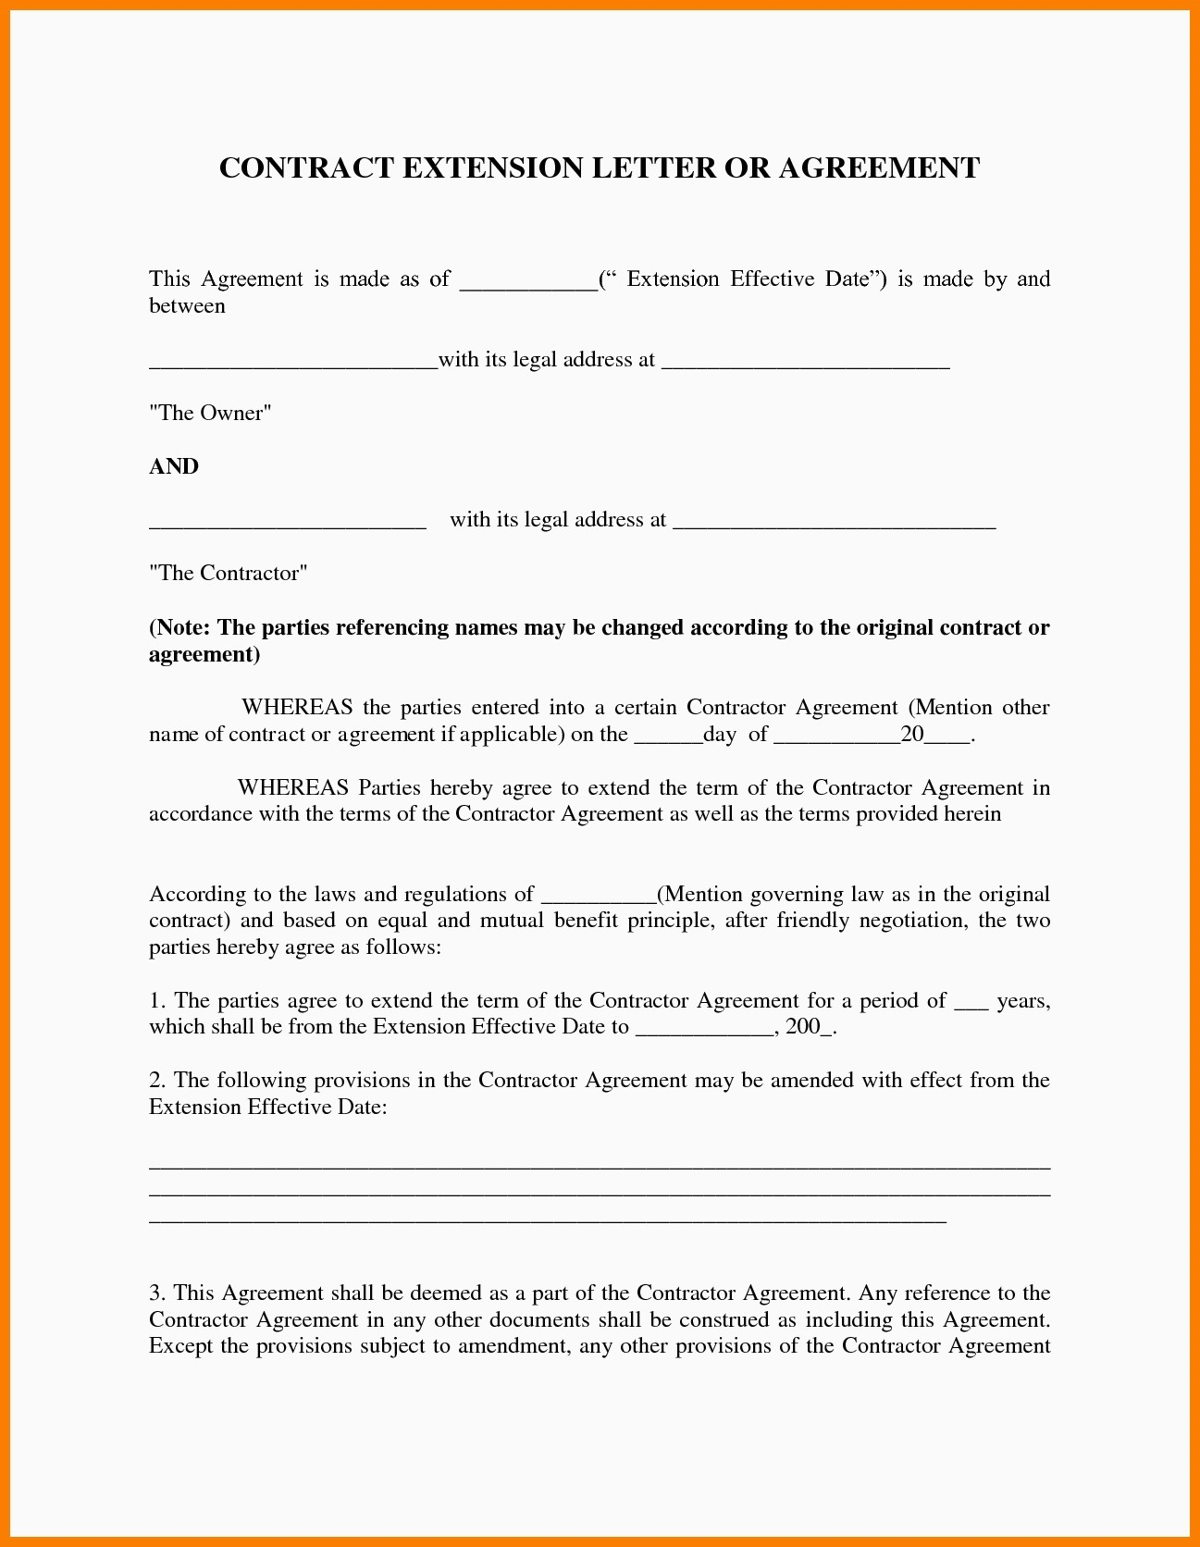 Legal Agreement Between Two Parties Agreement Between Two Privat Parties Contract Extension Letter Two